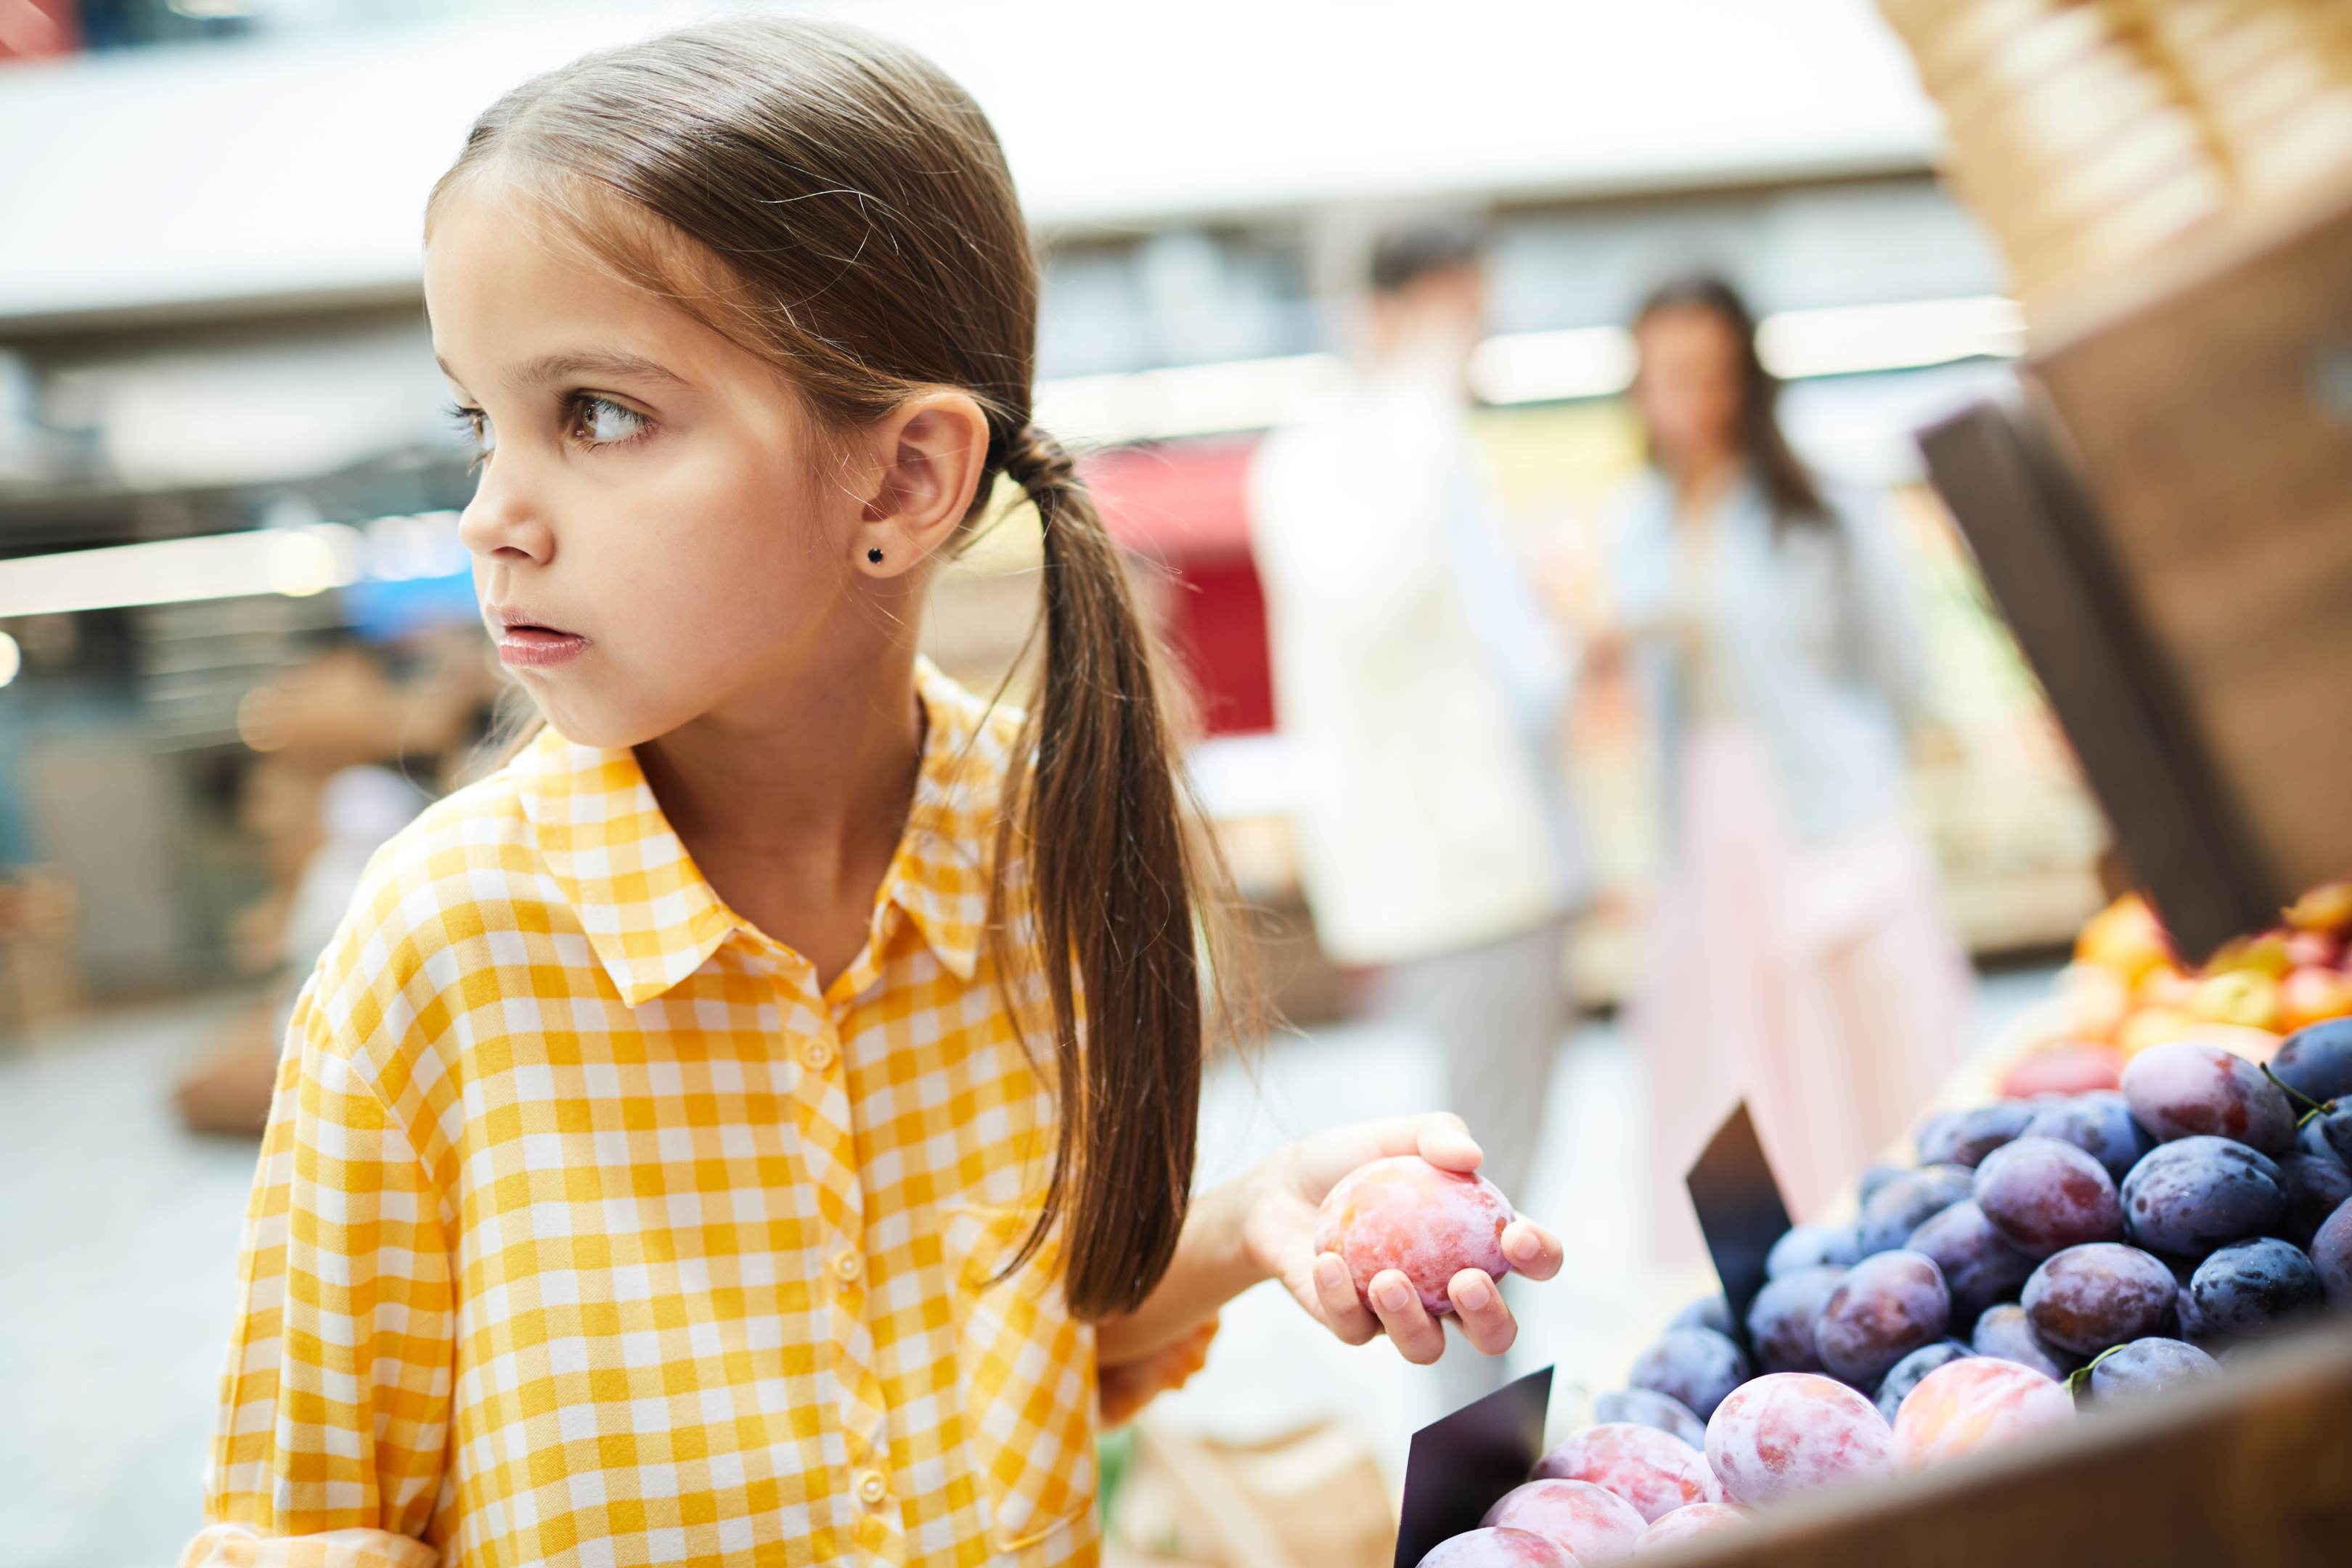 Concerned girl with ponytails, dressed in a checkered shirt, stands by the food shelves holding a plum, contemplating the consequences and deciding against stealing it in the grocery store.